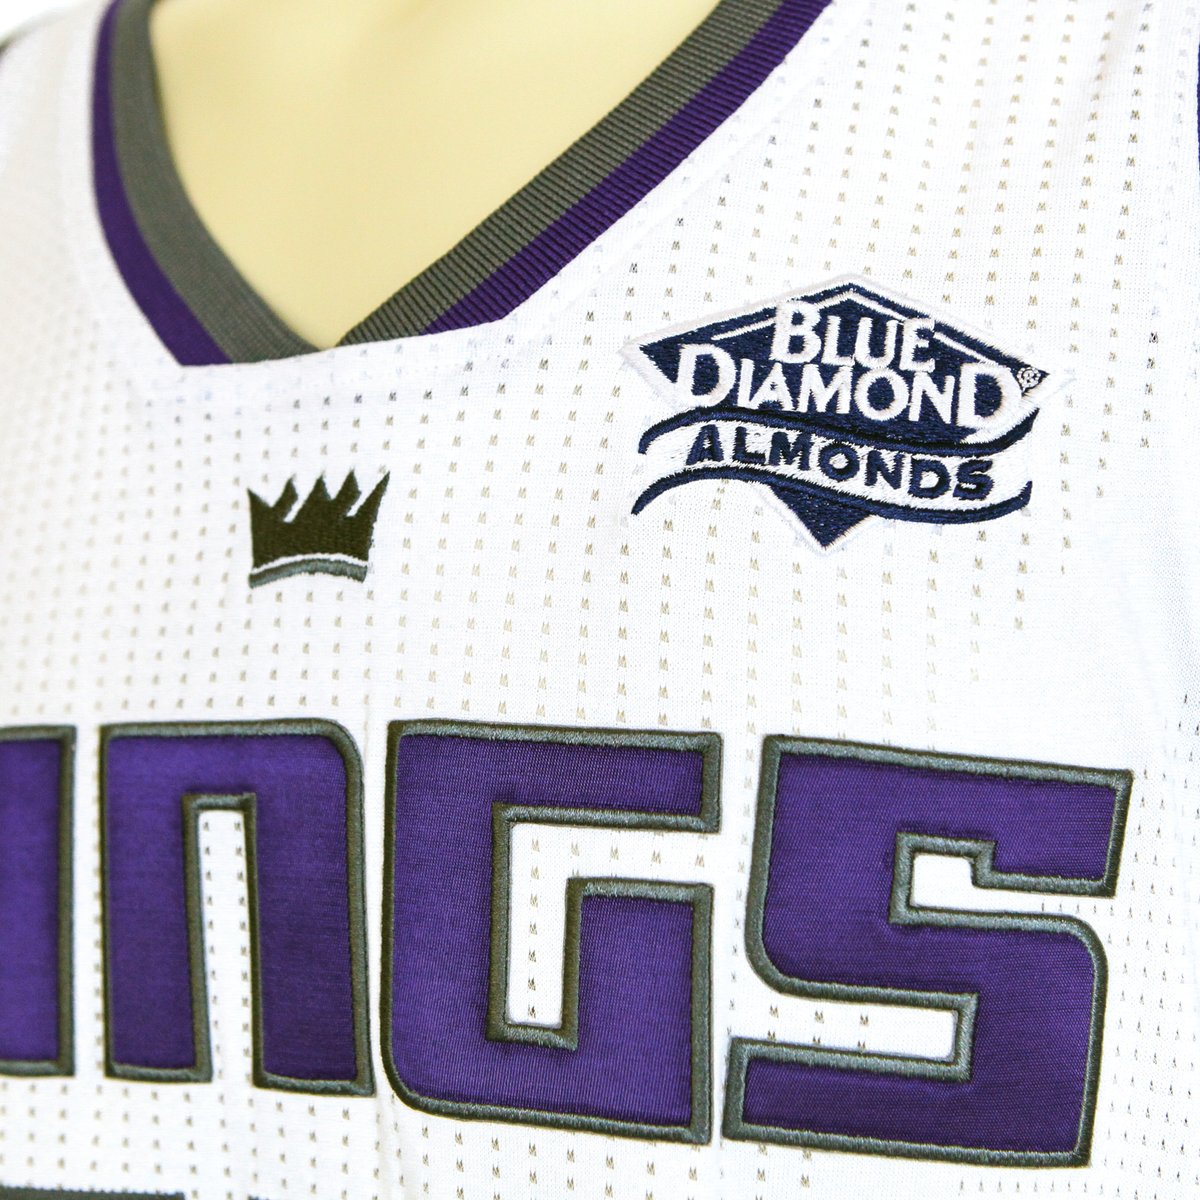 How do i purchase/unlock this Sacramento Kings white jersey in